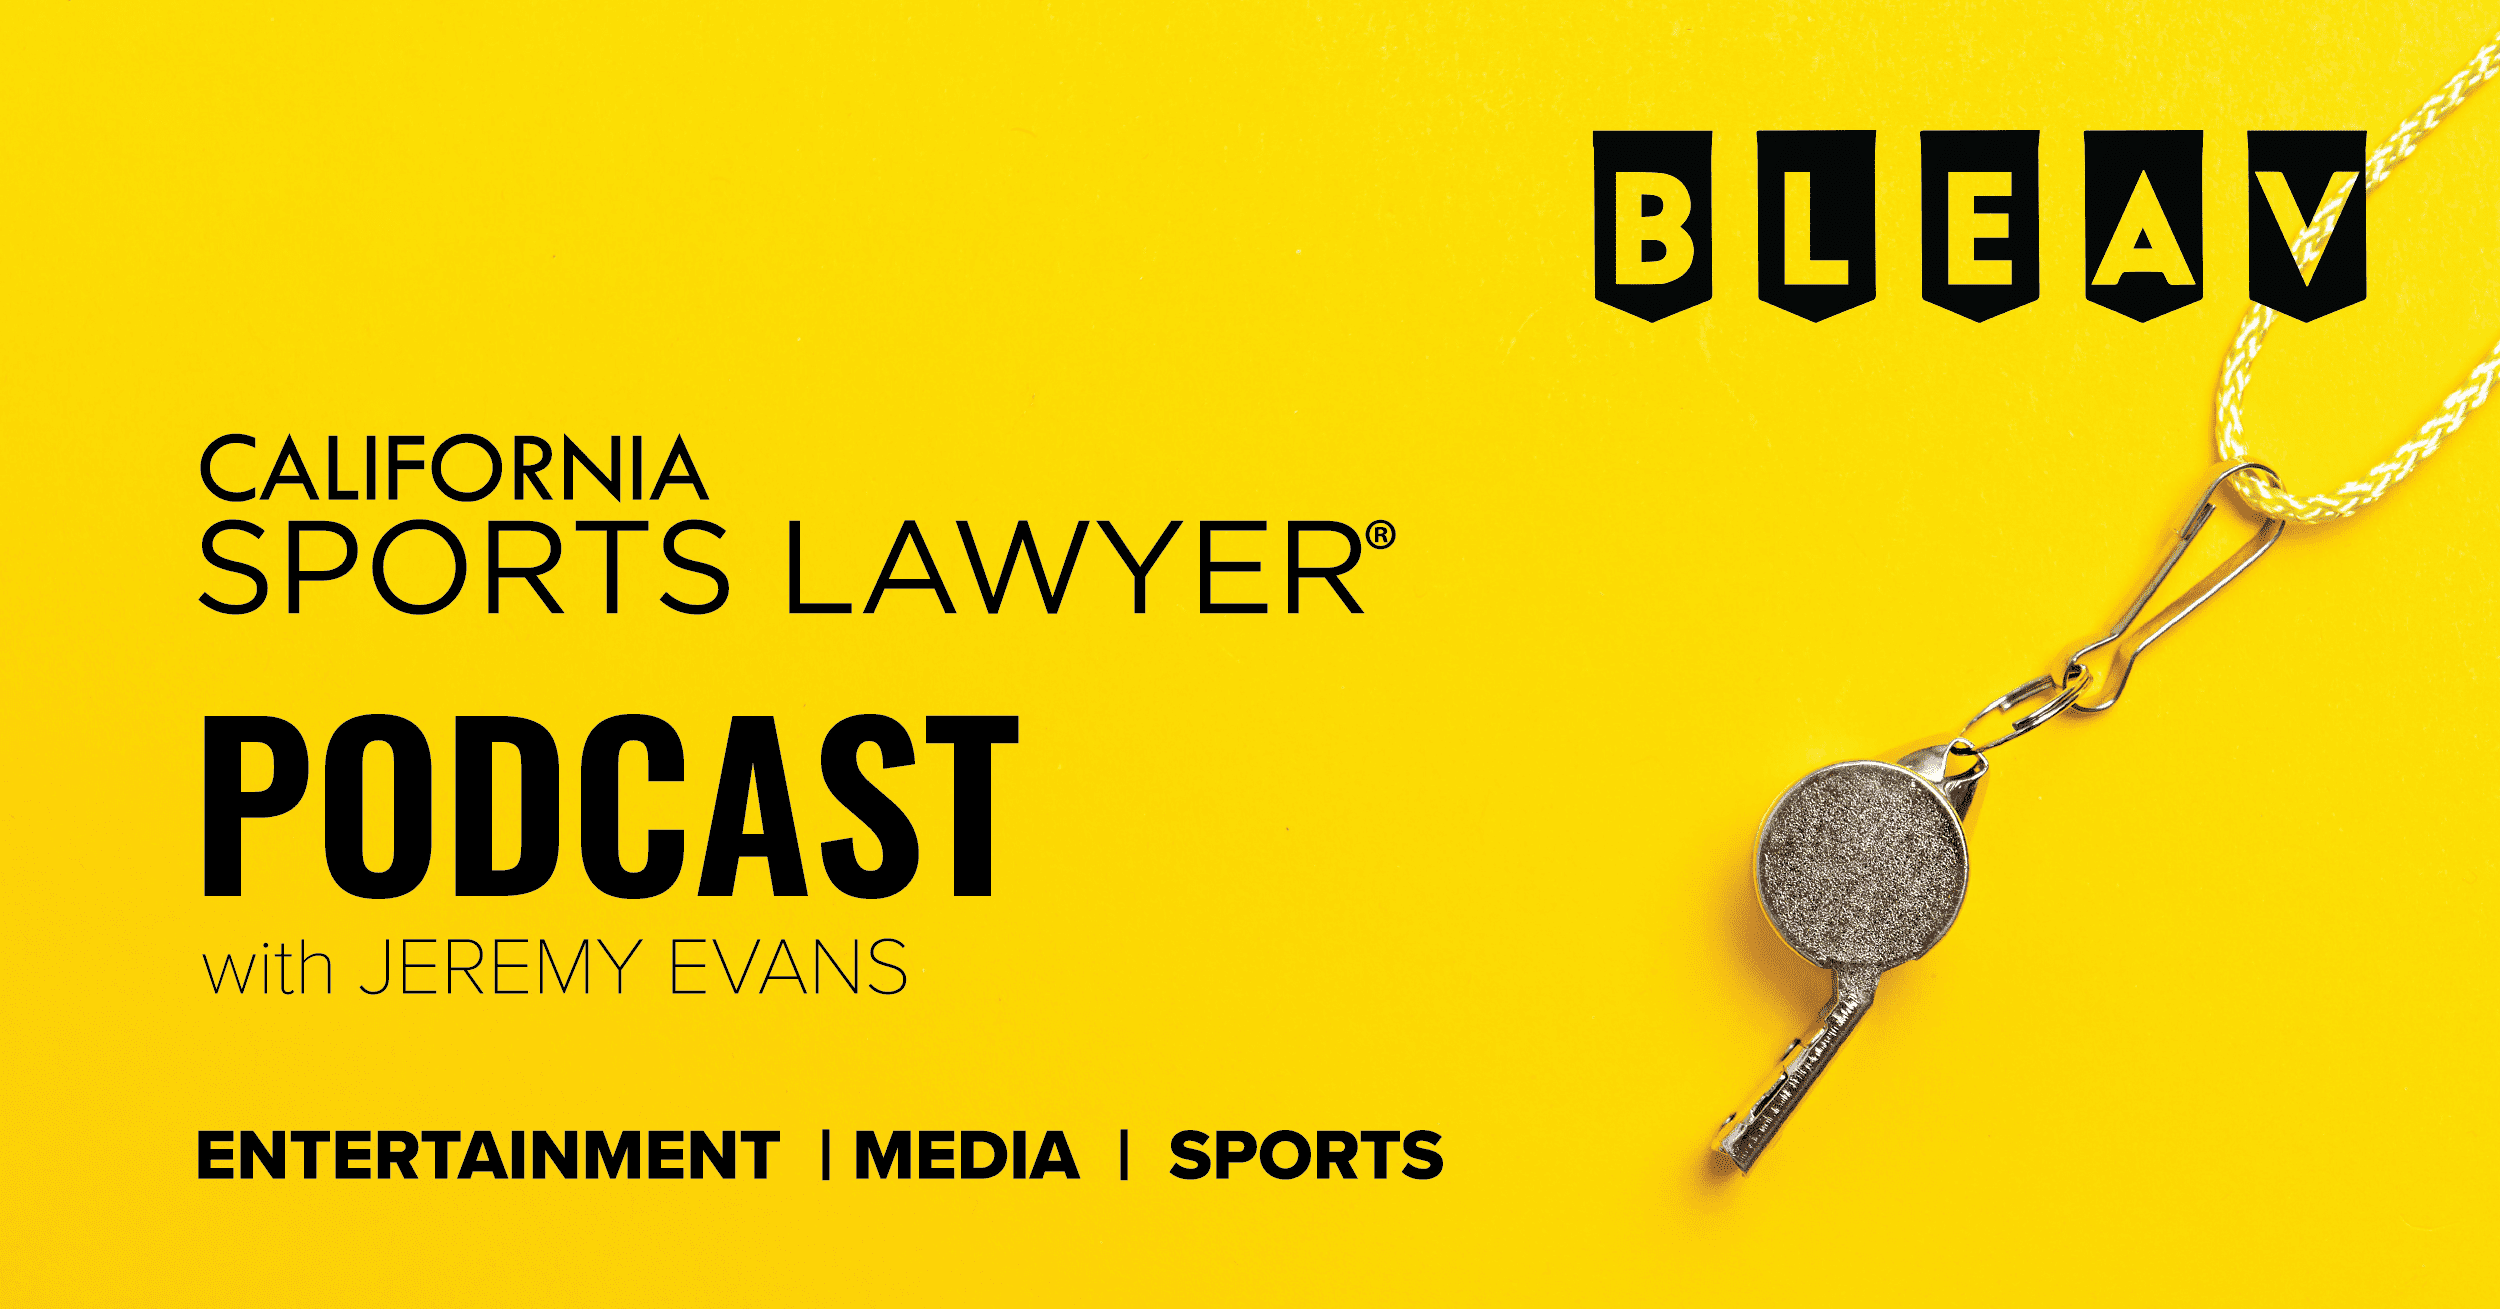 The California Sports Lawyer® Podcast with Jeremy Evans: Hollywood’s Creative Dilemma